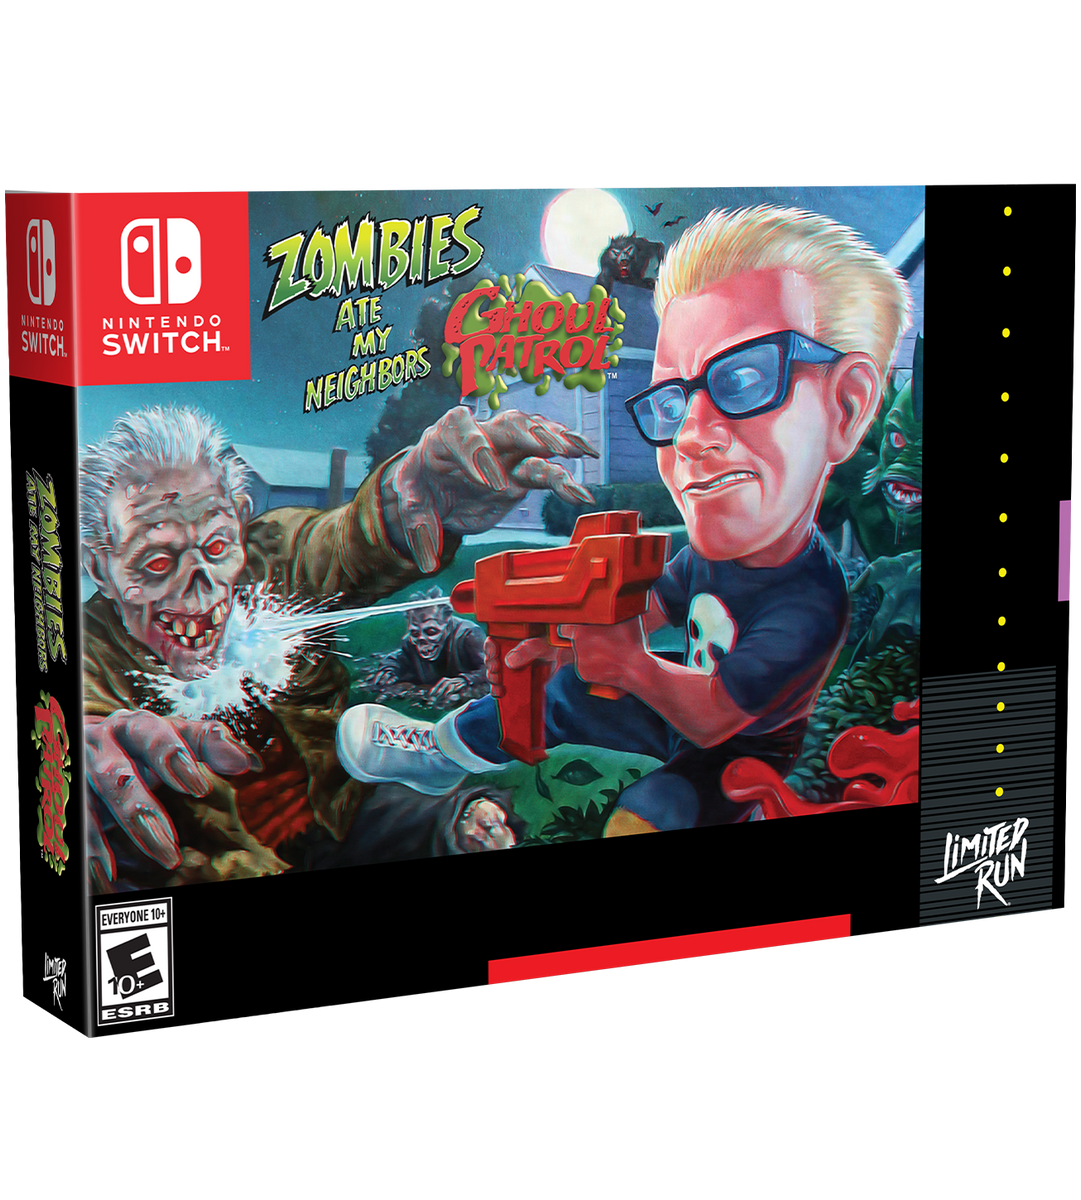 Limited Run Games on X: Zombies! Zombies everywhere! The cult